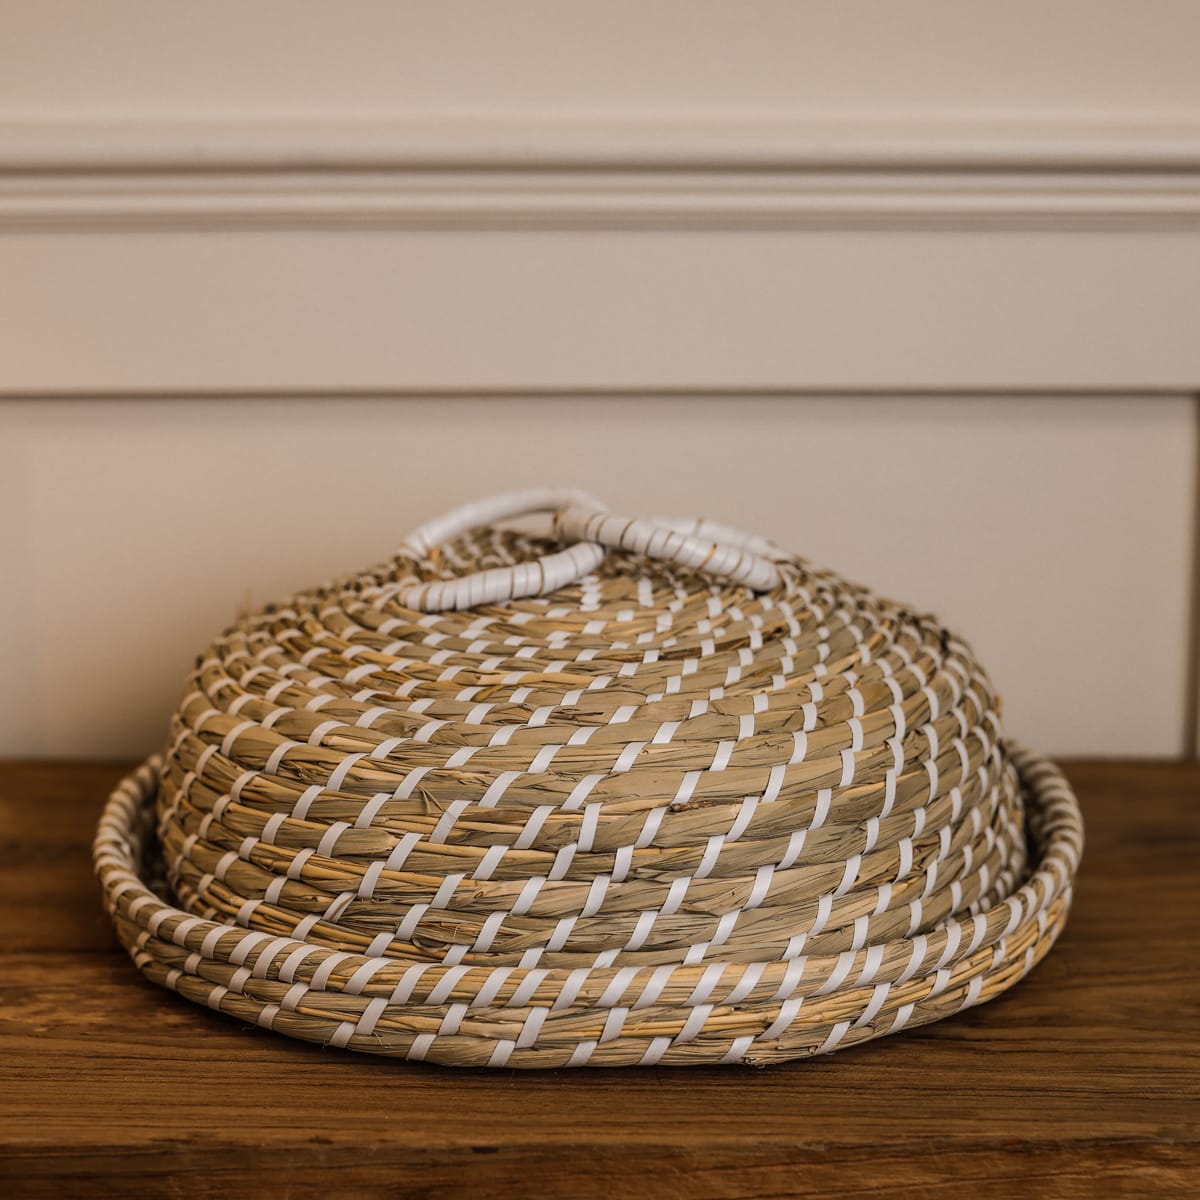 Woven seagrass cake dome with white loops and wooden console.